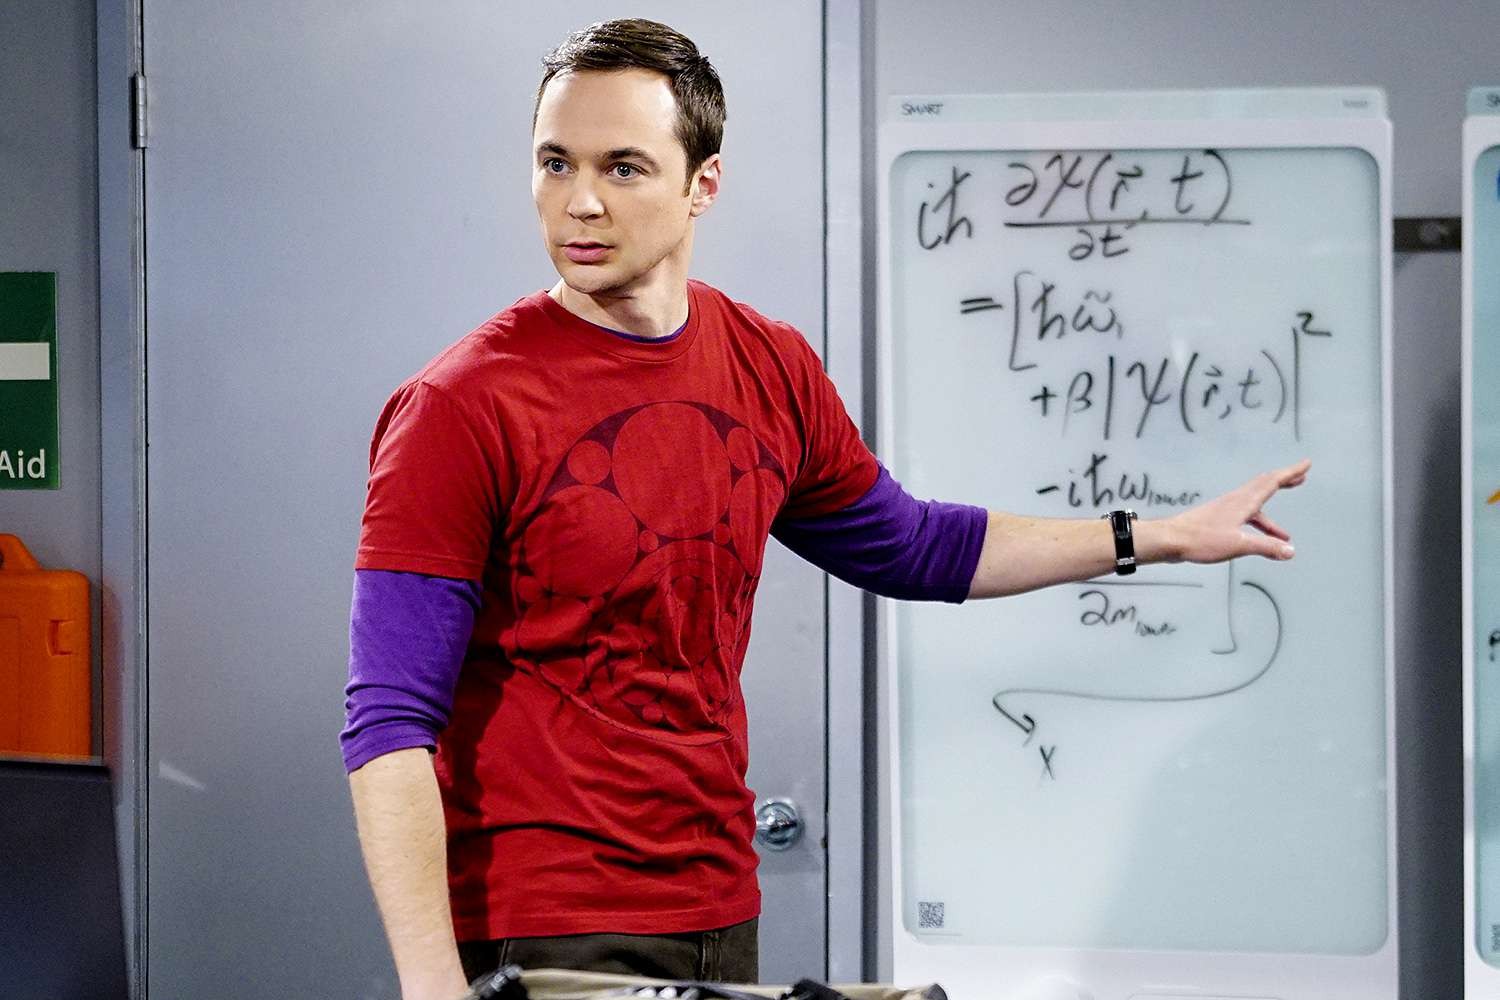 Jim Parsons played the beloved character of Sheldon Cooper in The Big Bang Theory